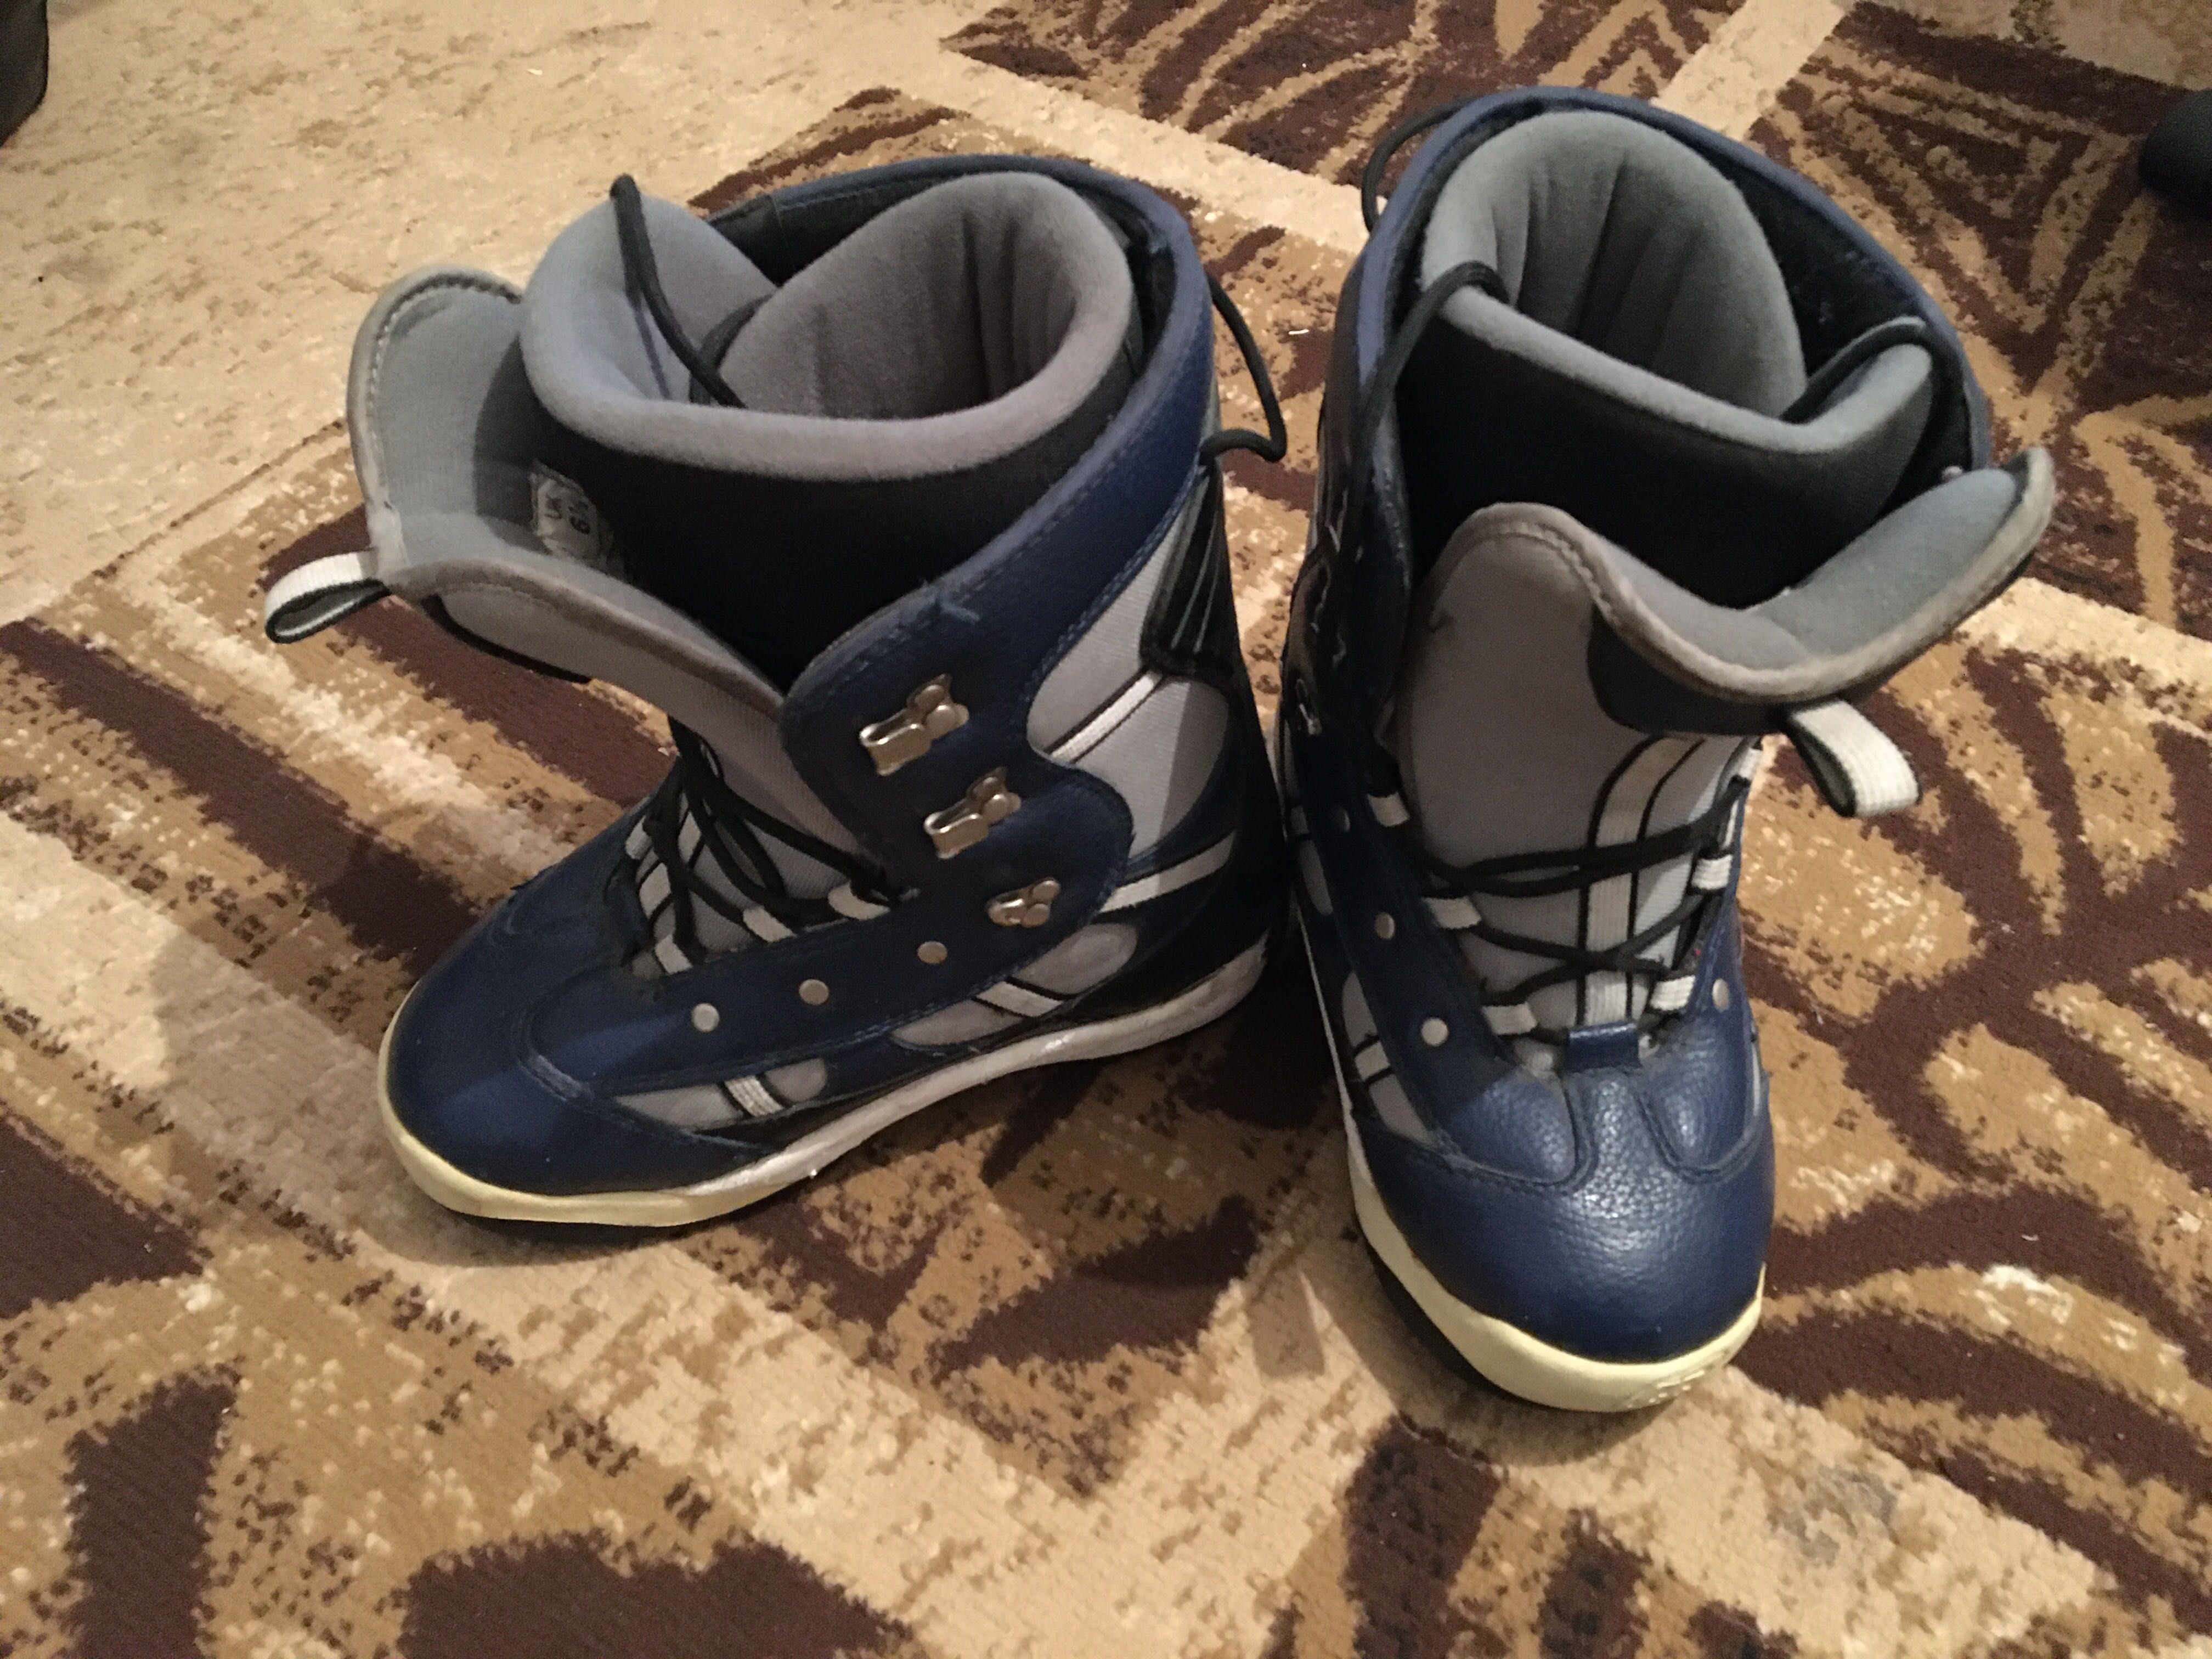 Boots Snowboard!